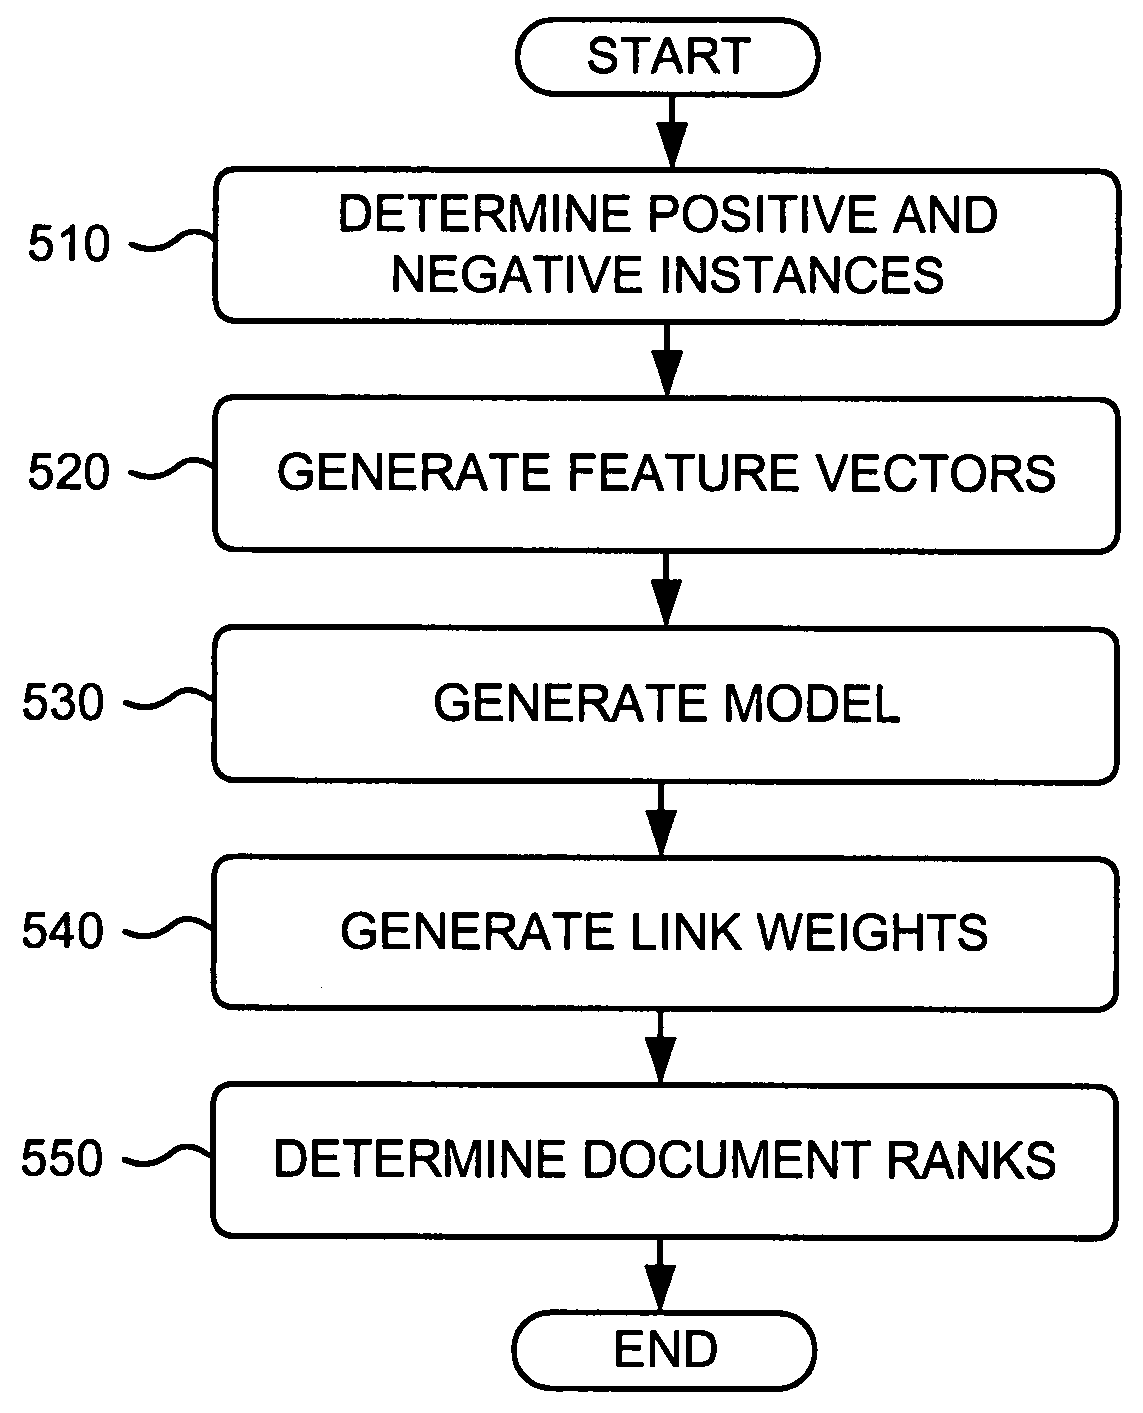 Ranking documents based on user behavior and/or feature data